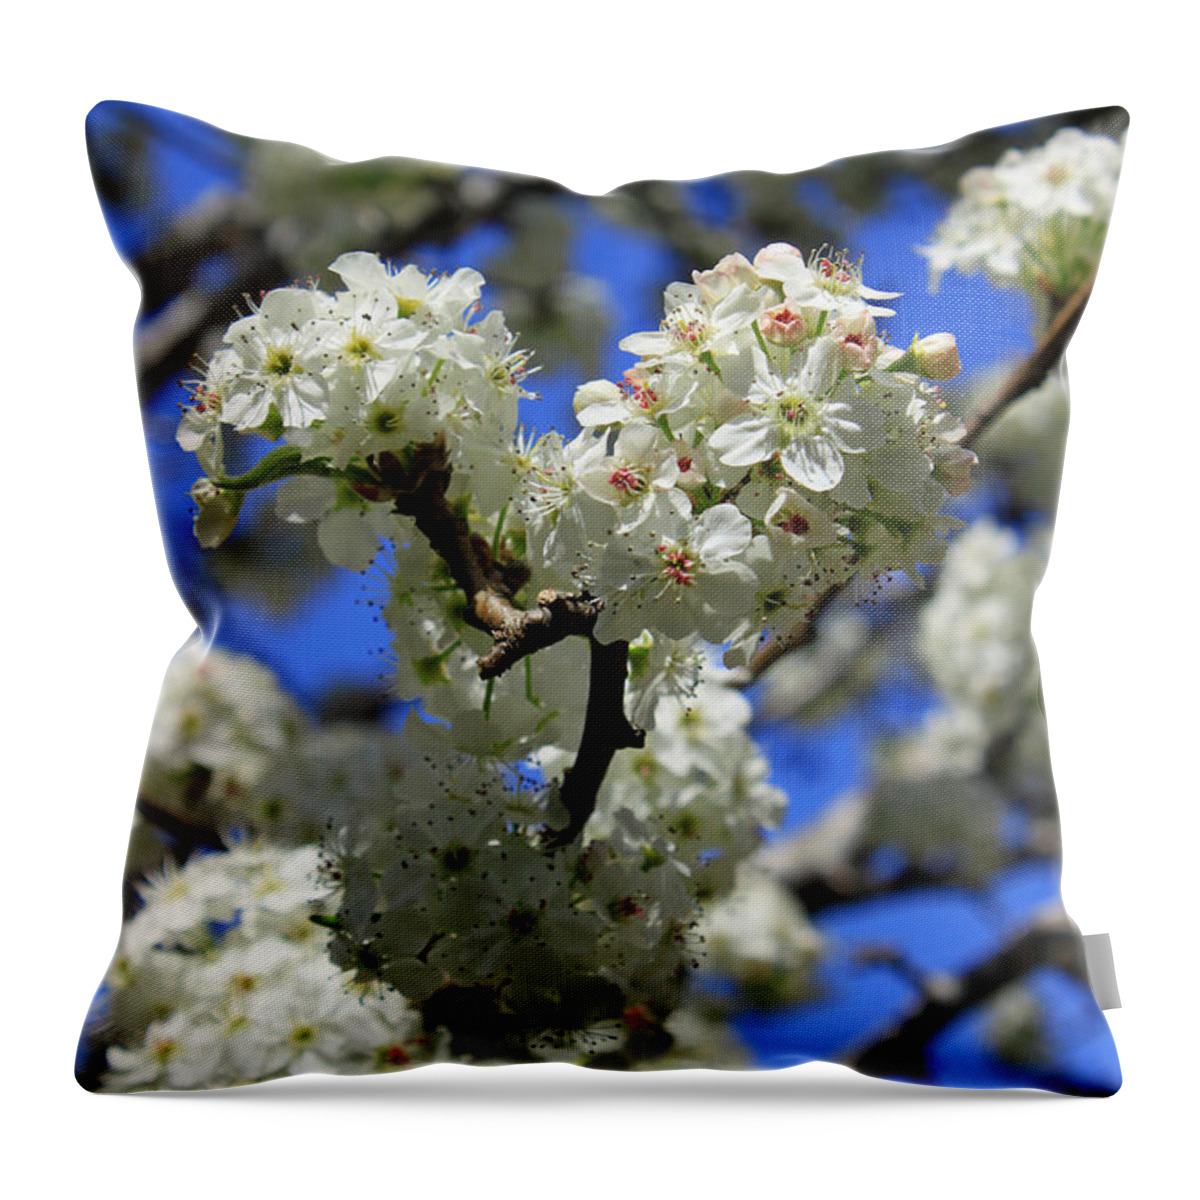 Bradford Pear Throw Pillow featuring the photograph Bradford Pear Blossoms by Suzanne Gaff